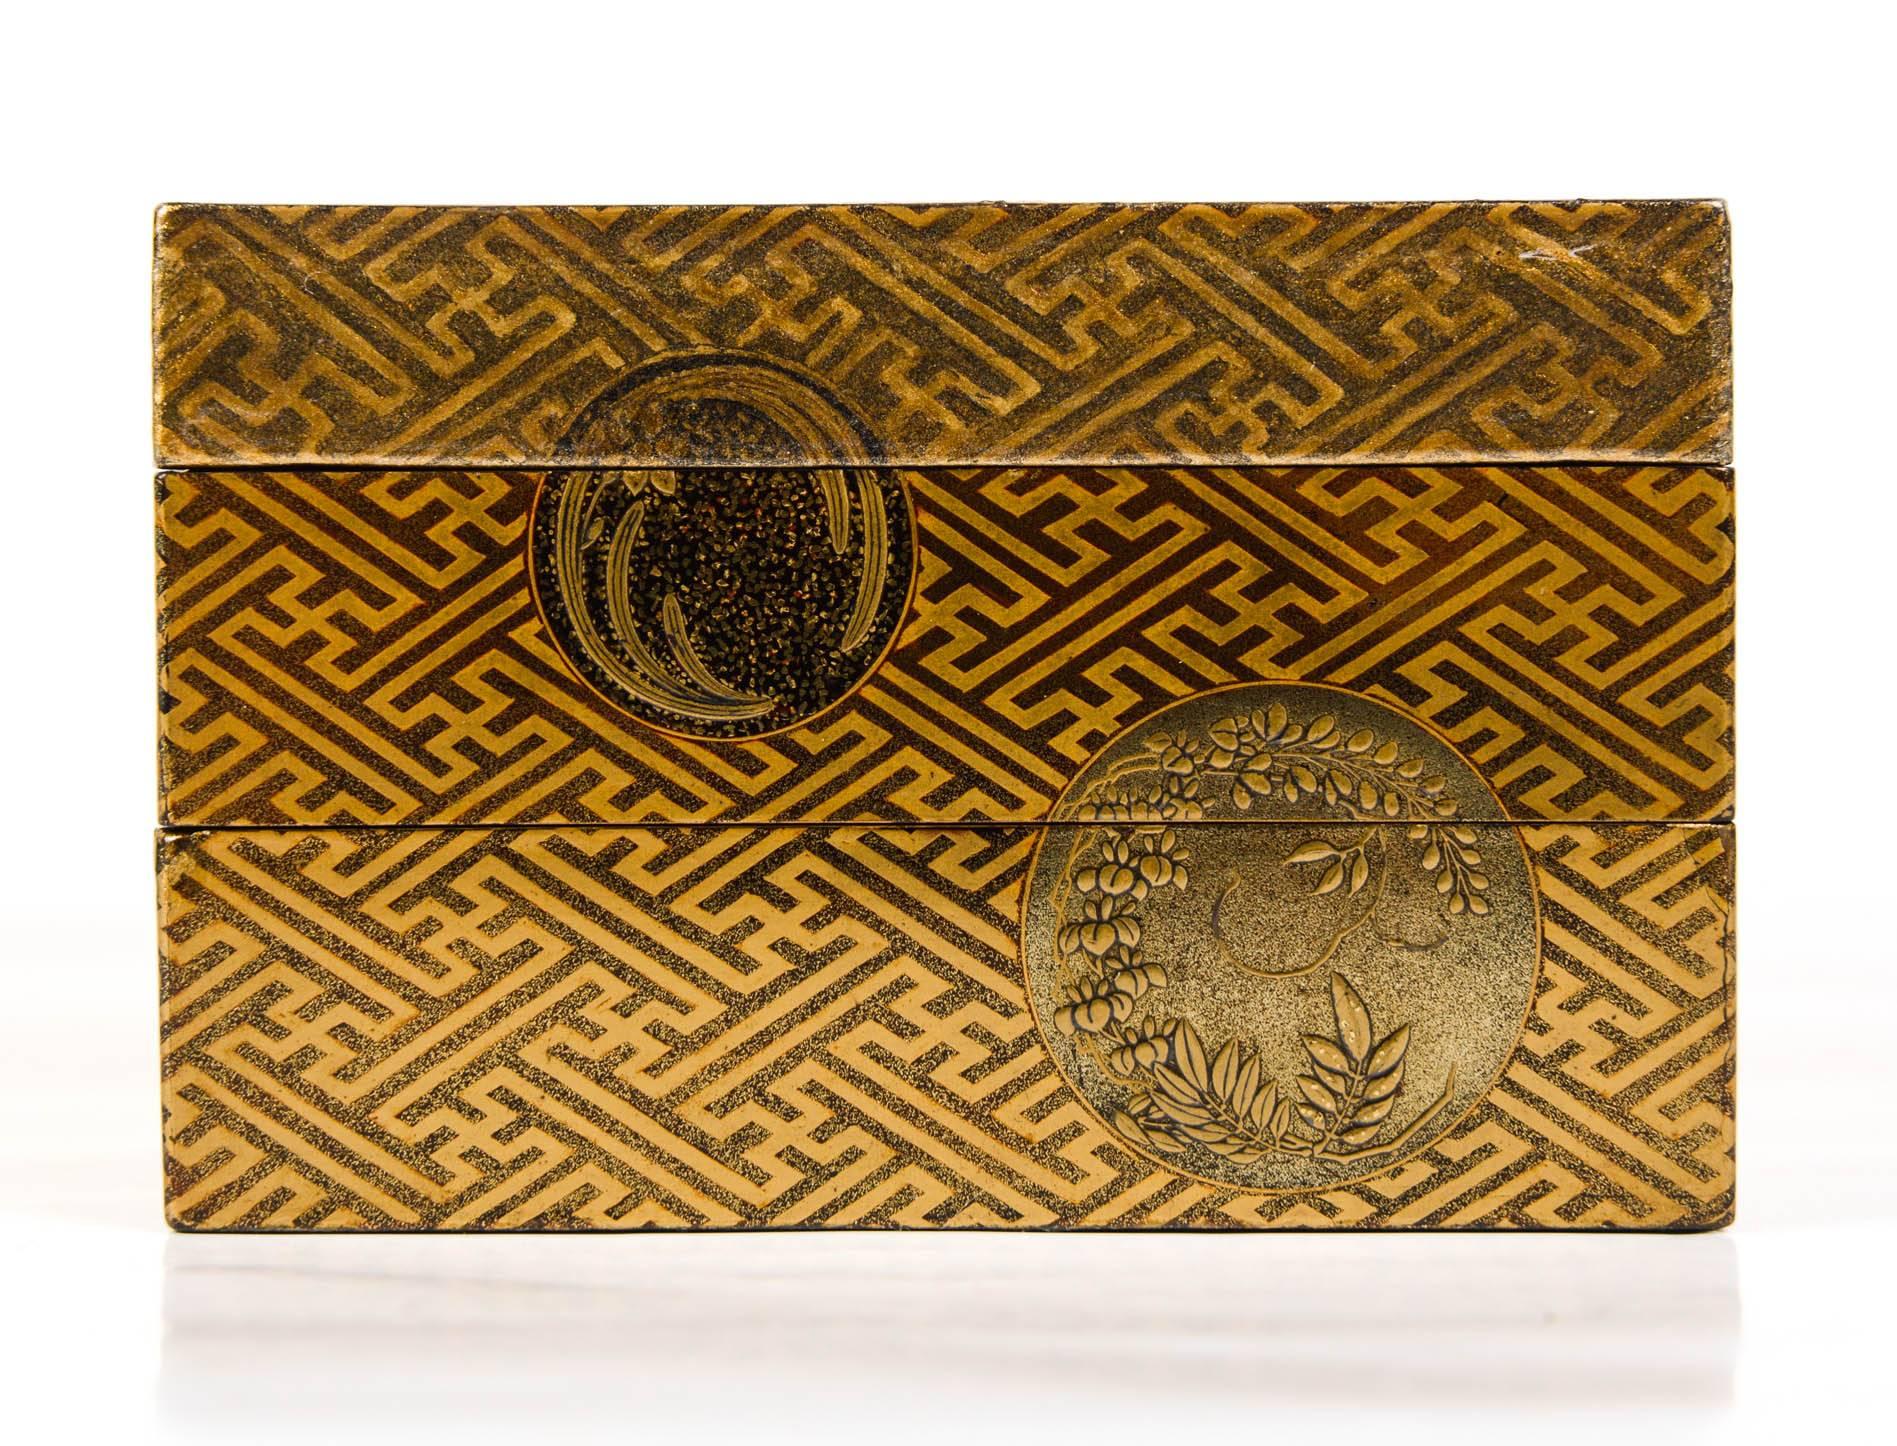 Kobako (box) with two trays depicting on the lid a embossed silvered decor of blossom cherry tress on a gold background, the sides decorated with geometric patterns and mons. The interior in nashi-ji lacquer. The second tray depicts two small gold